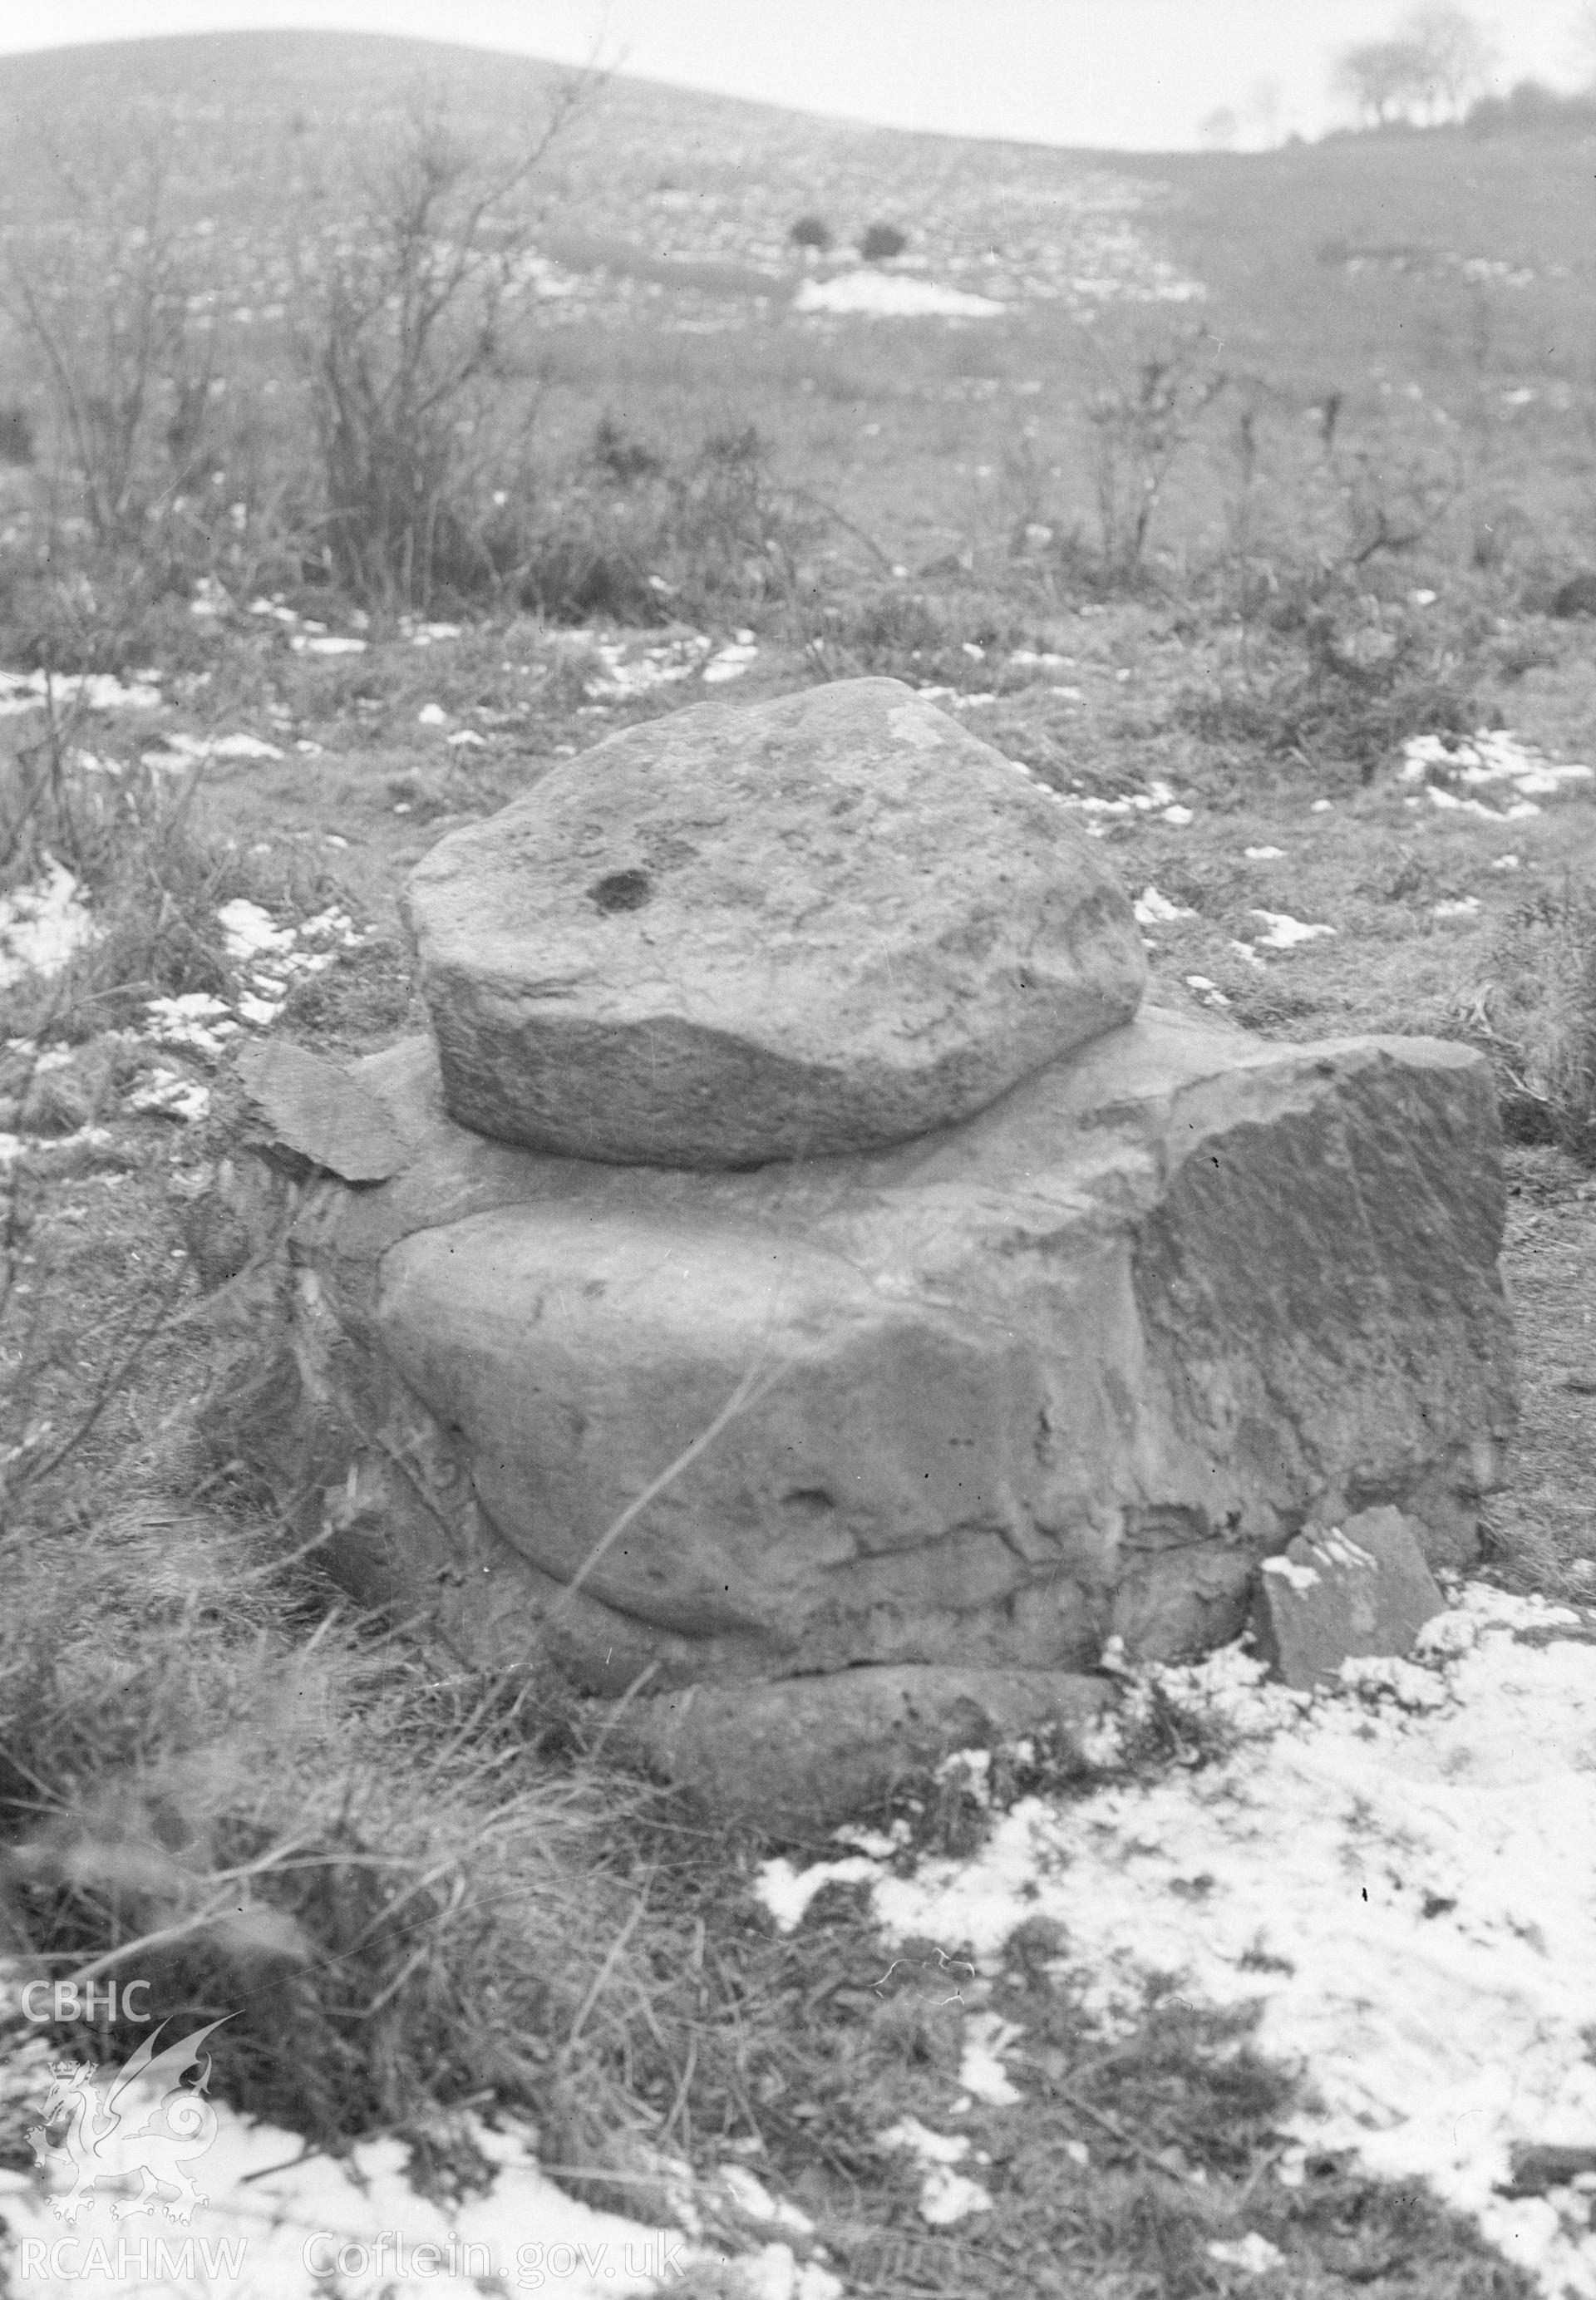 Digital copy of a nitrate negative showing Bwrddy Tri Arglwydd Boundary Stone. From the Cadw Monuments in Care Commission.